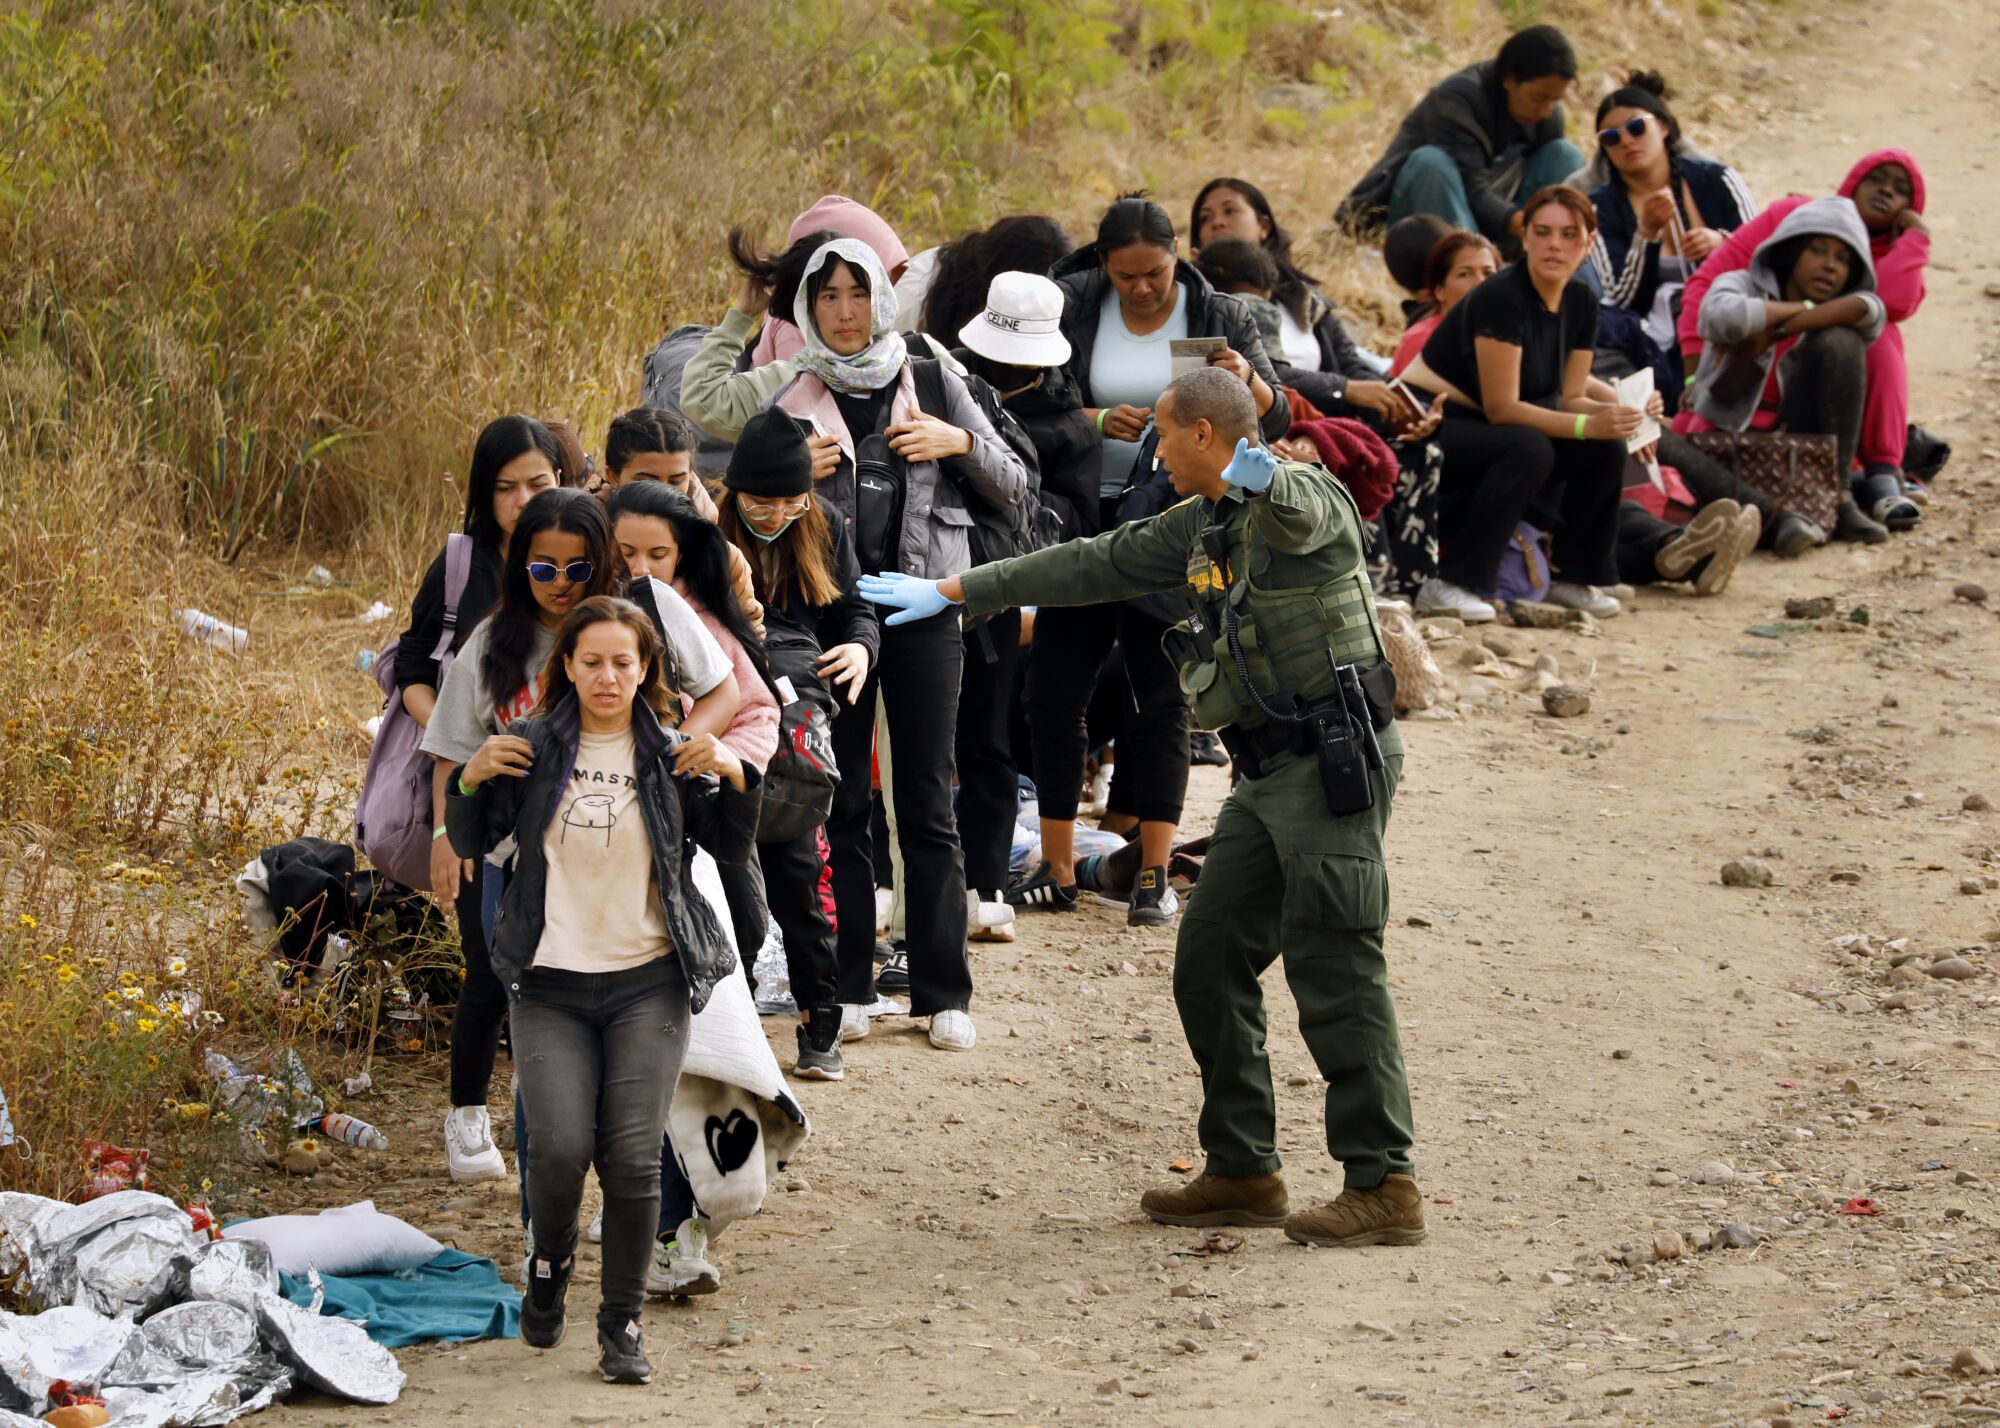 U.S. border patrol agents lead a group of women to vehicles headed to processing.